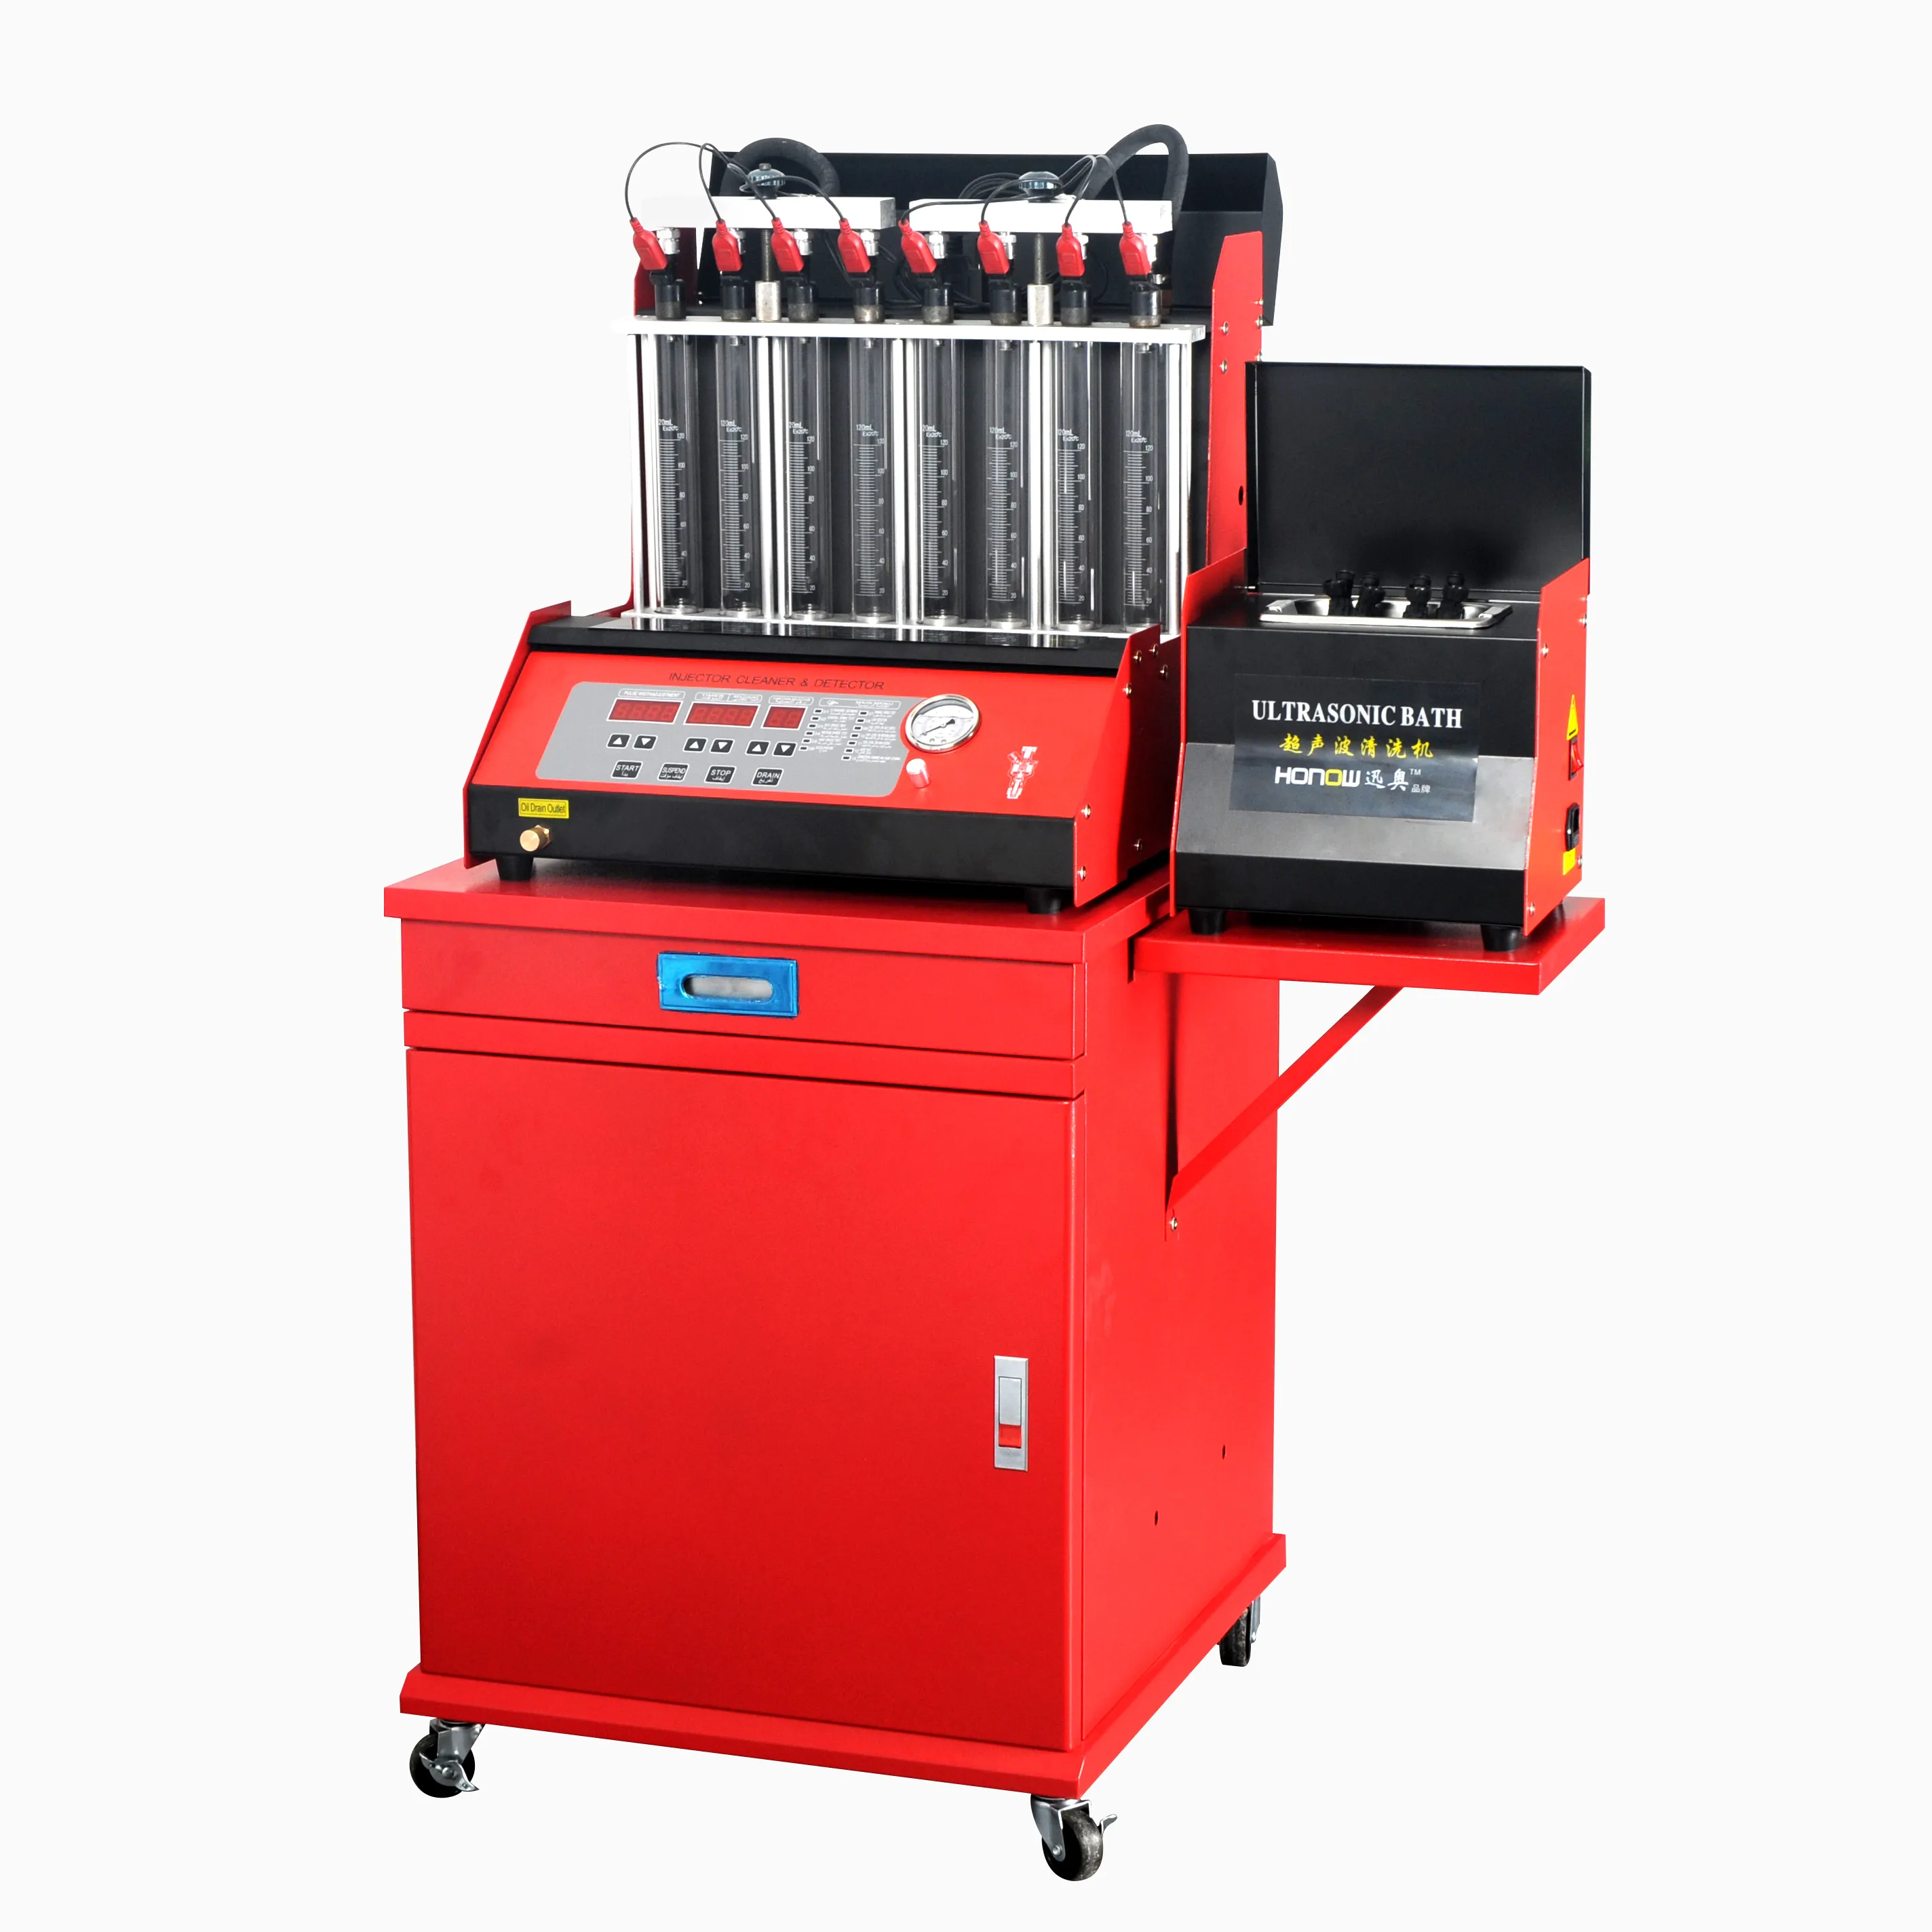 Automatic 8 Cylinder Fuel Injector Analyzer and Cleaner, Gasoline Injection Test and Ultrasonic Clean Machine